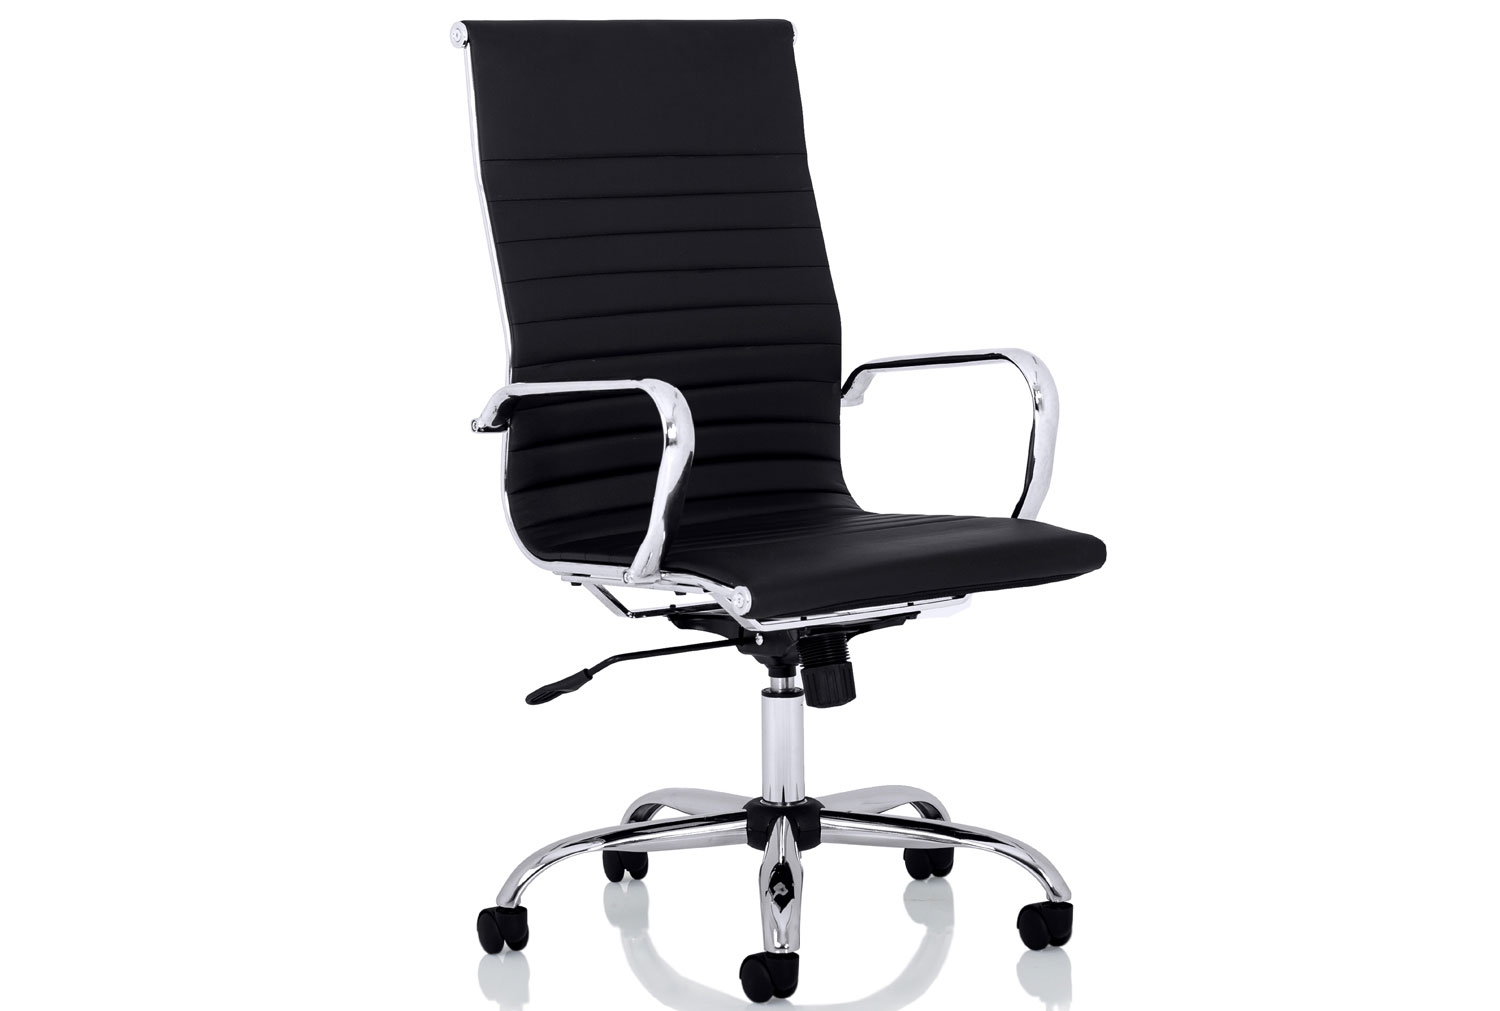 Besos High Back Bonded Leather Executive Office Chair (Black) , Express Delivery